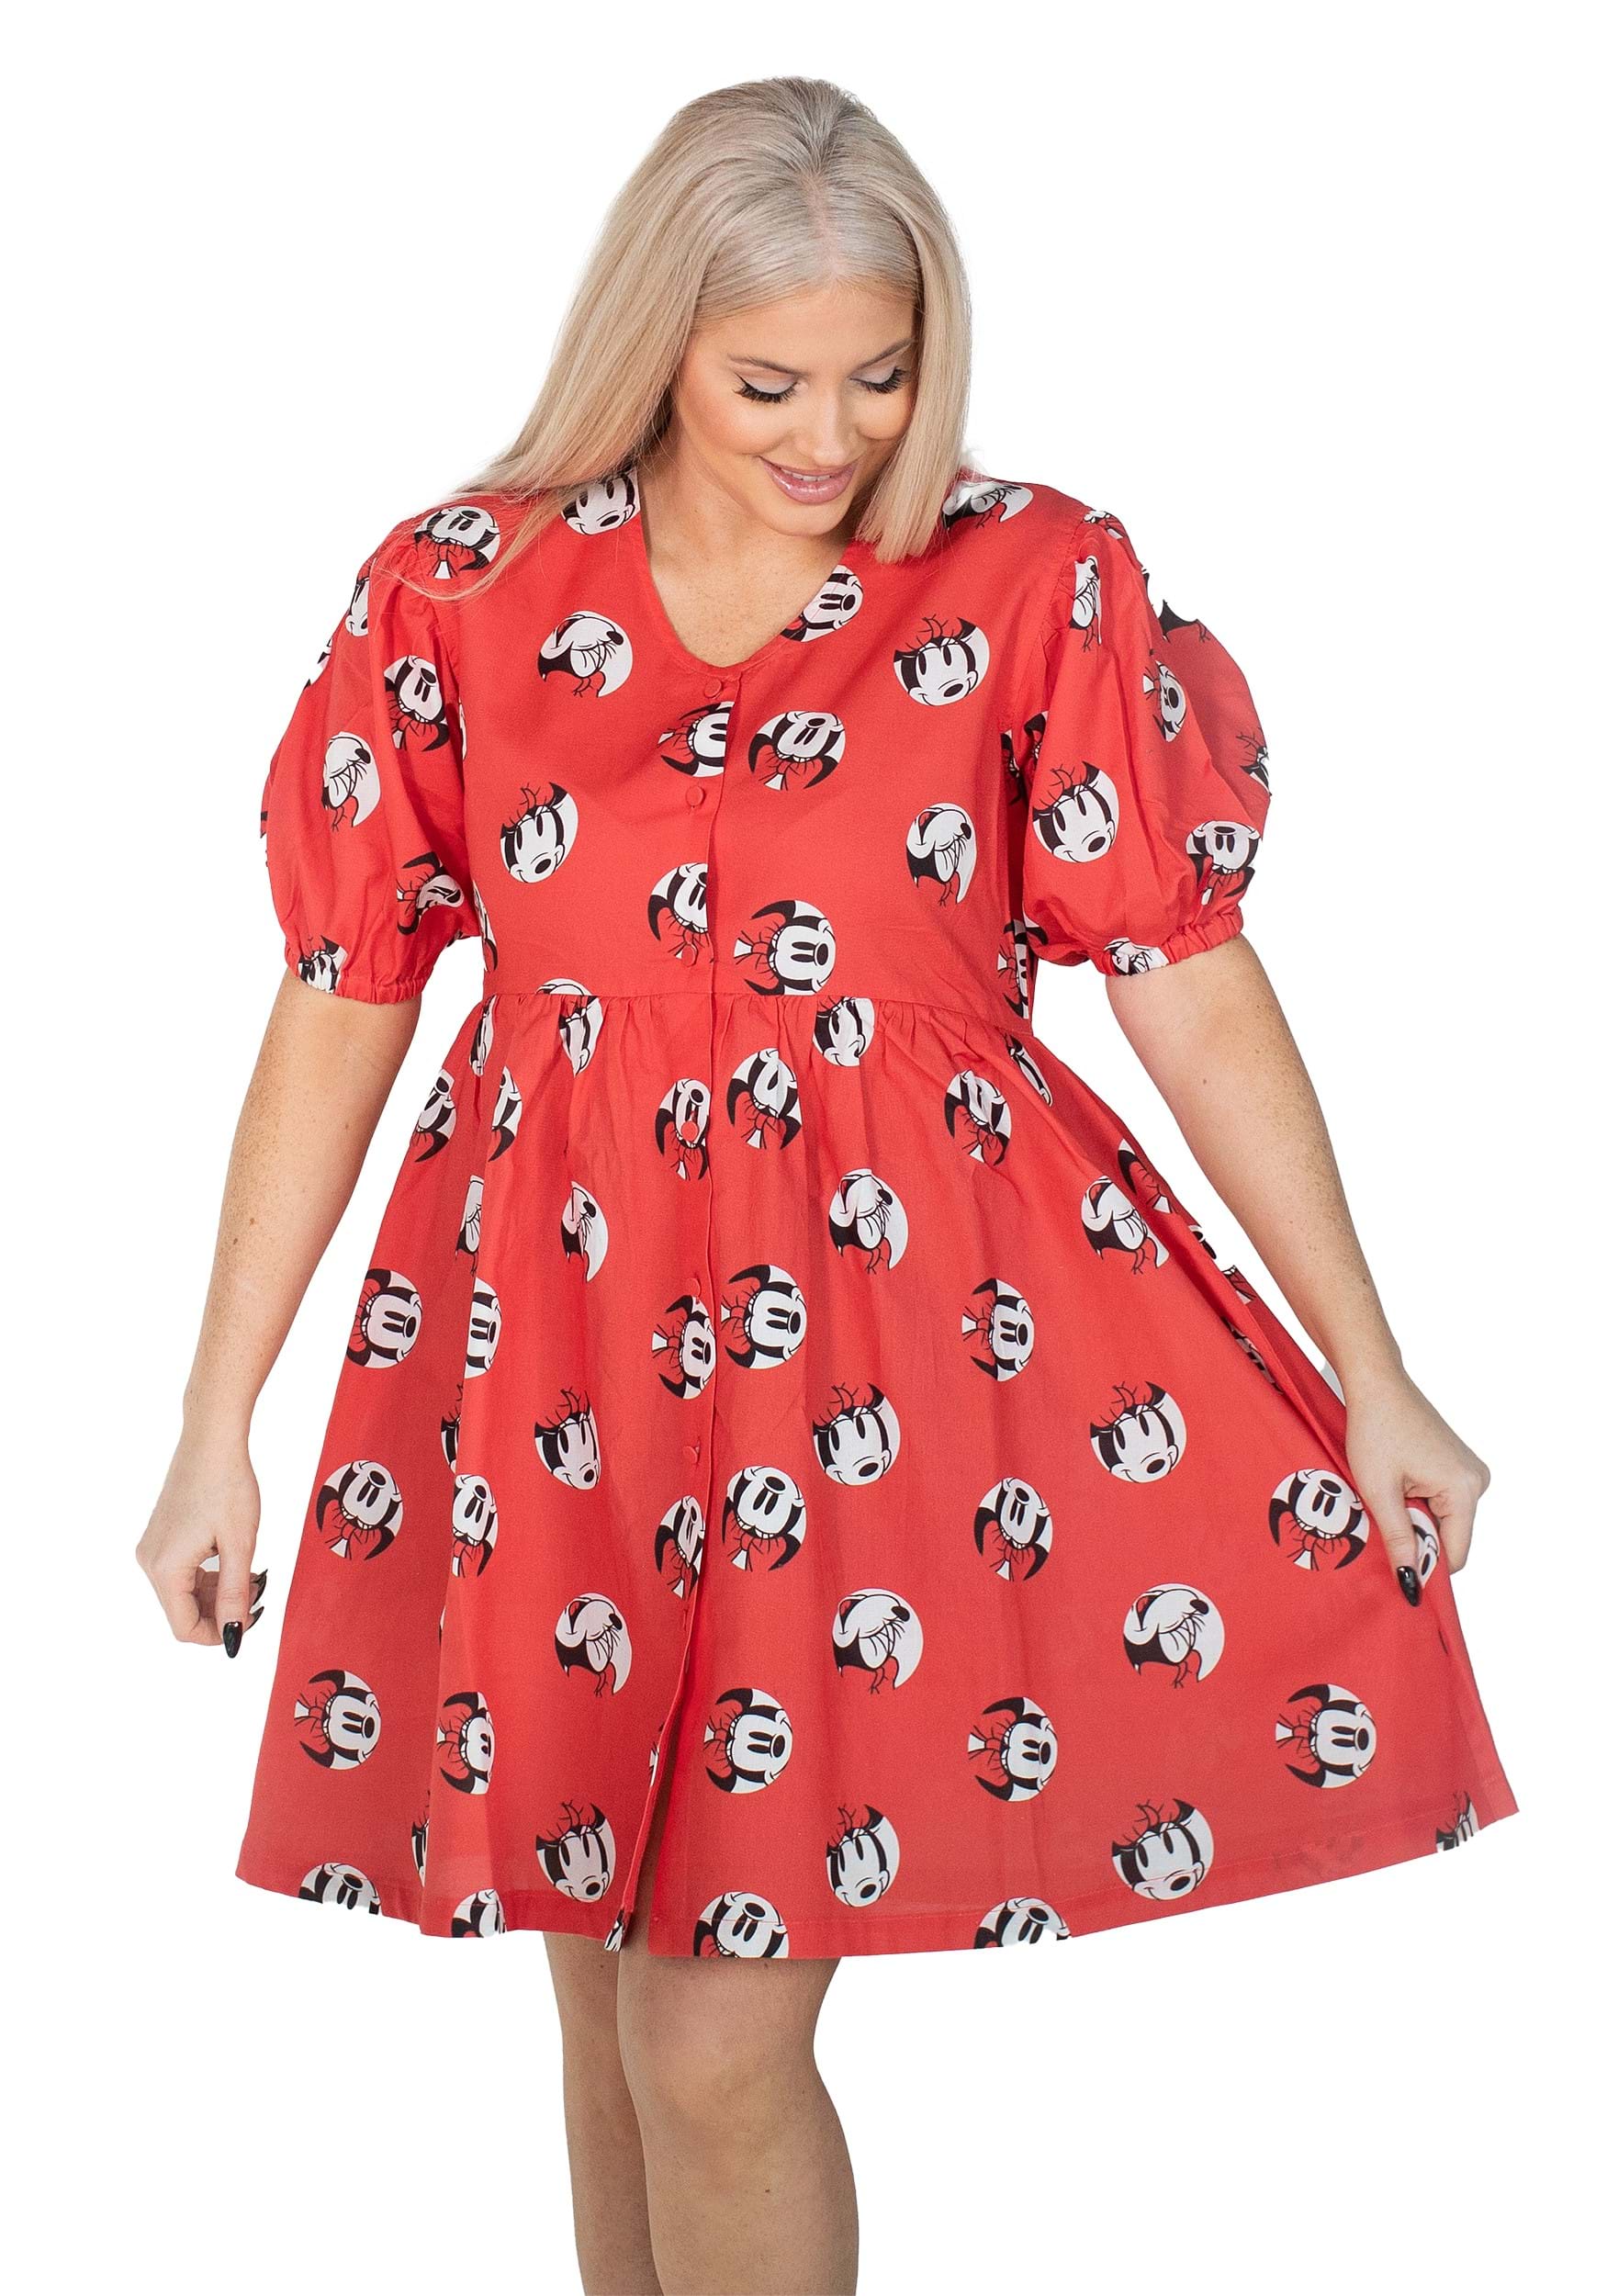 New Size 5T DISNEY CHARACTERS PRINT ANGEL SLEEVES DRESS 